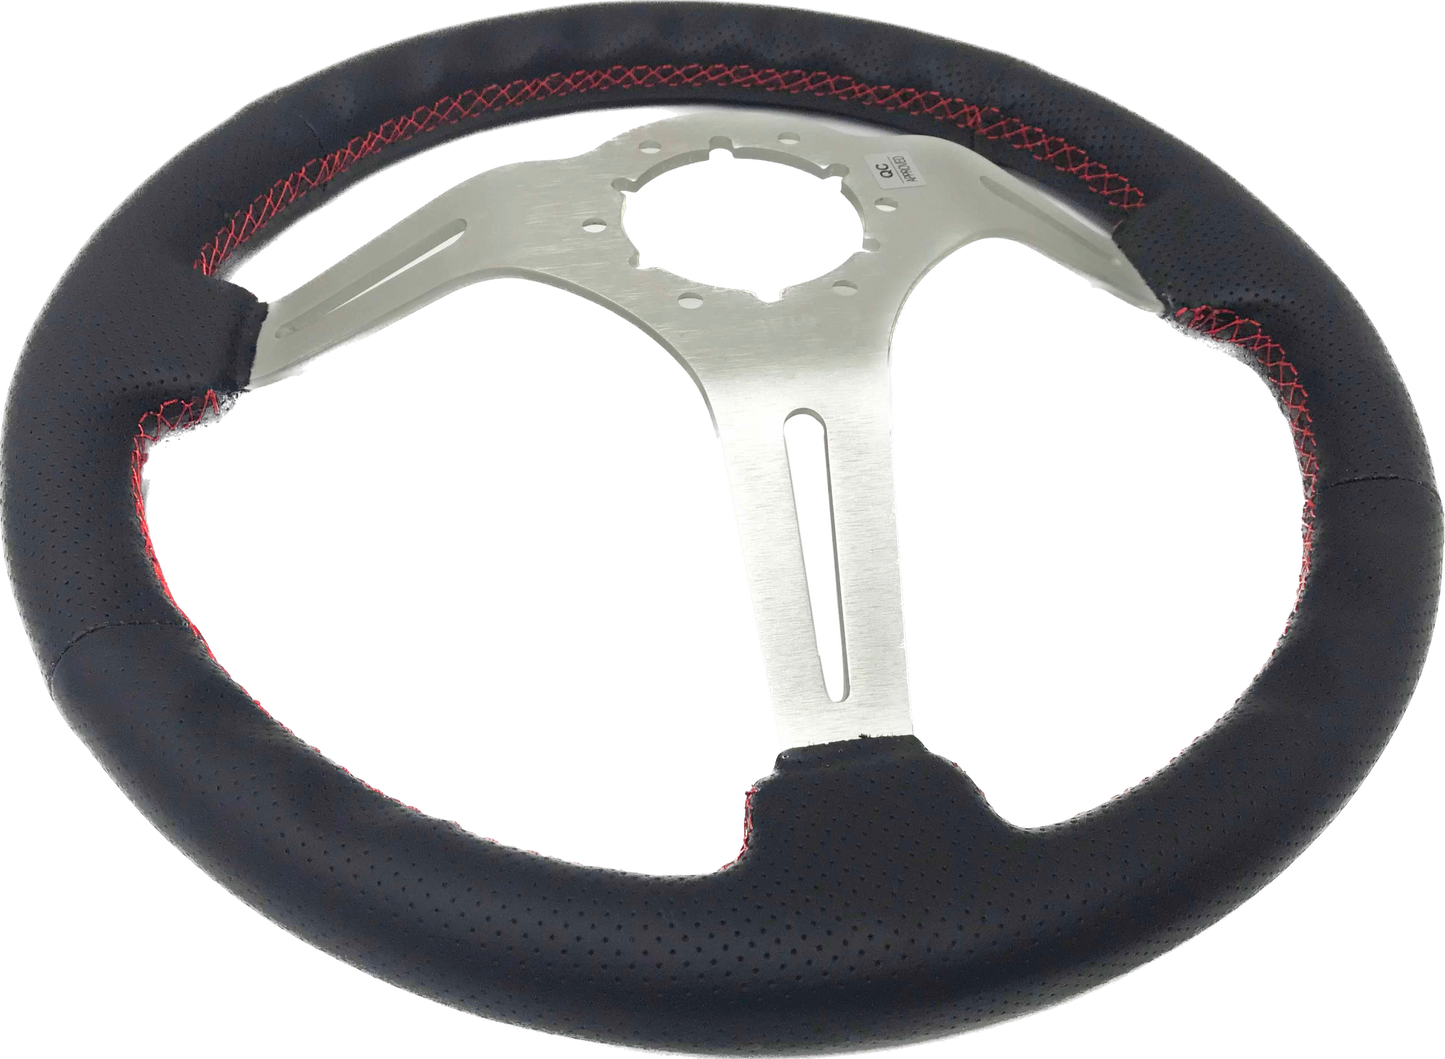 1989-04 Nissan GTR (R32) Steering Wheel Kit | Perforated Leather | ST3587BLK-RED